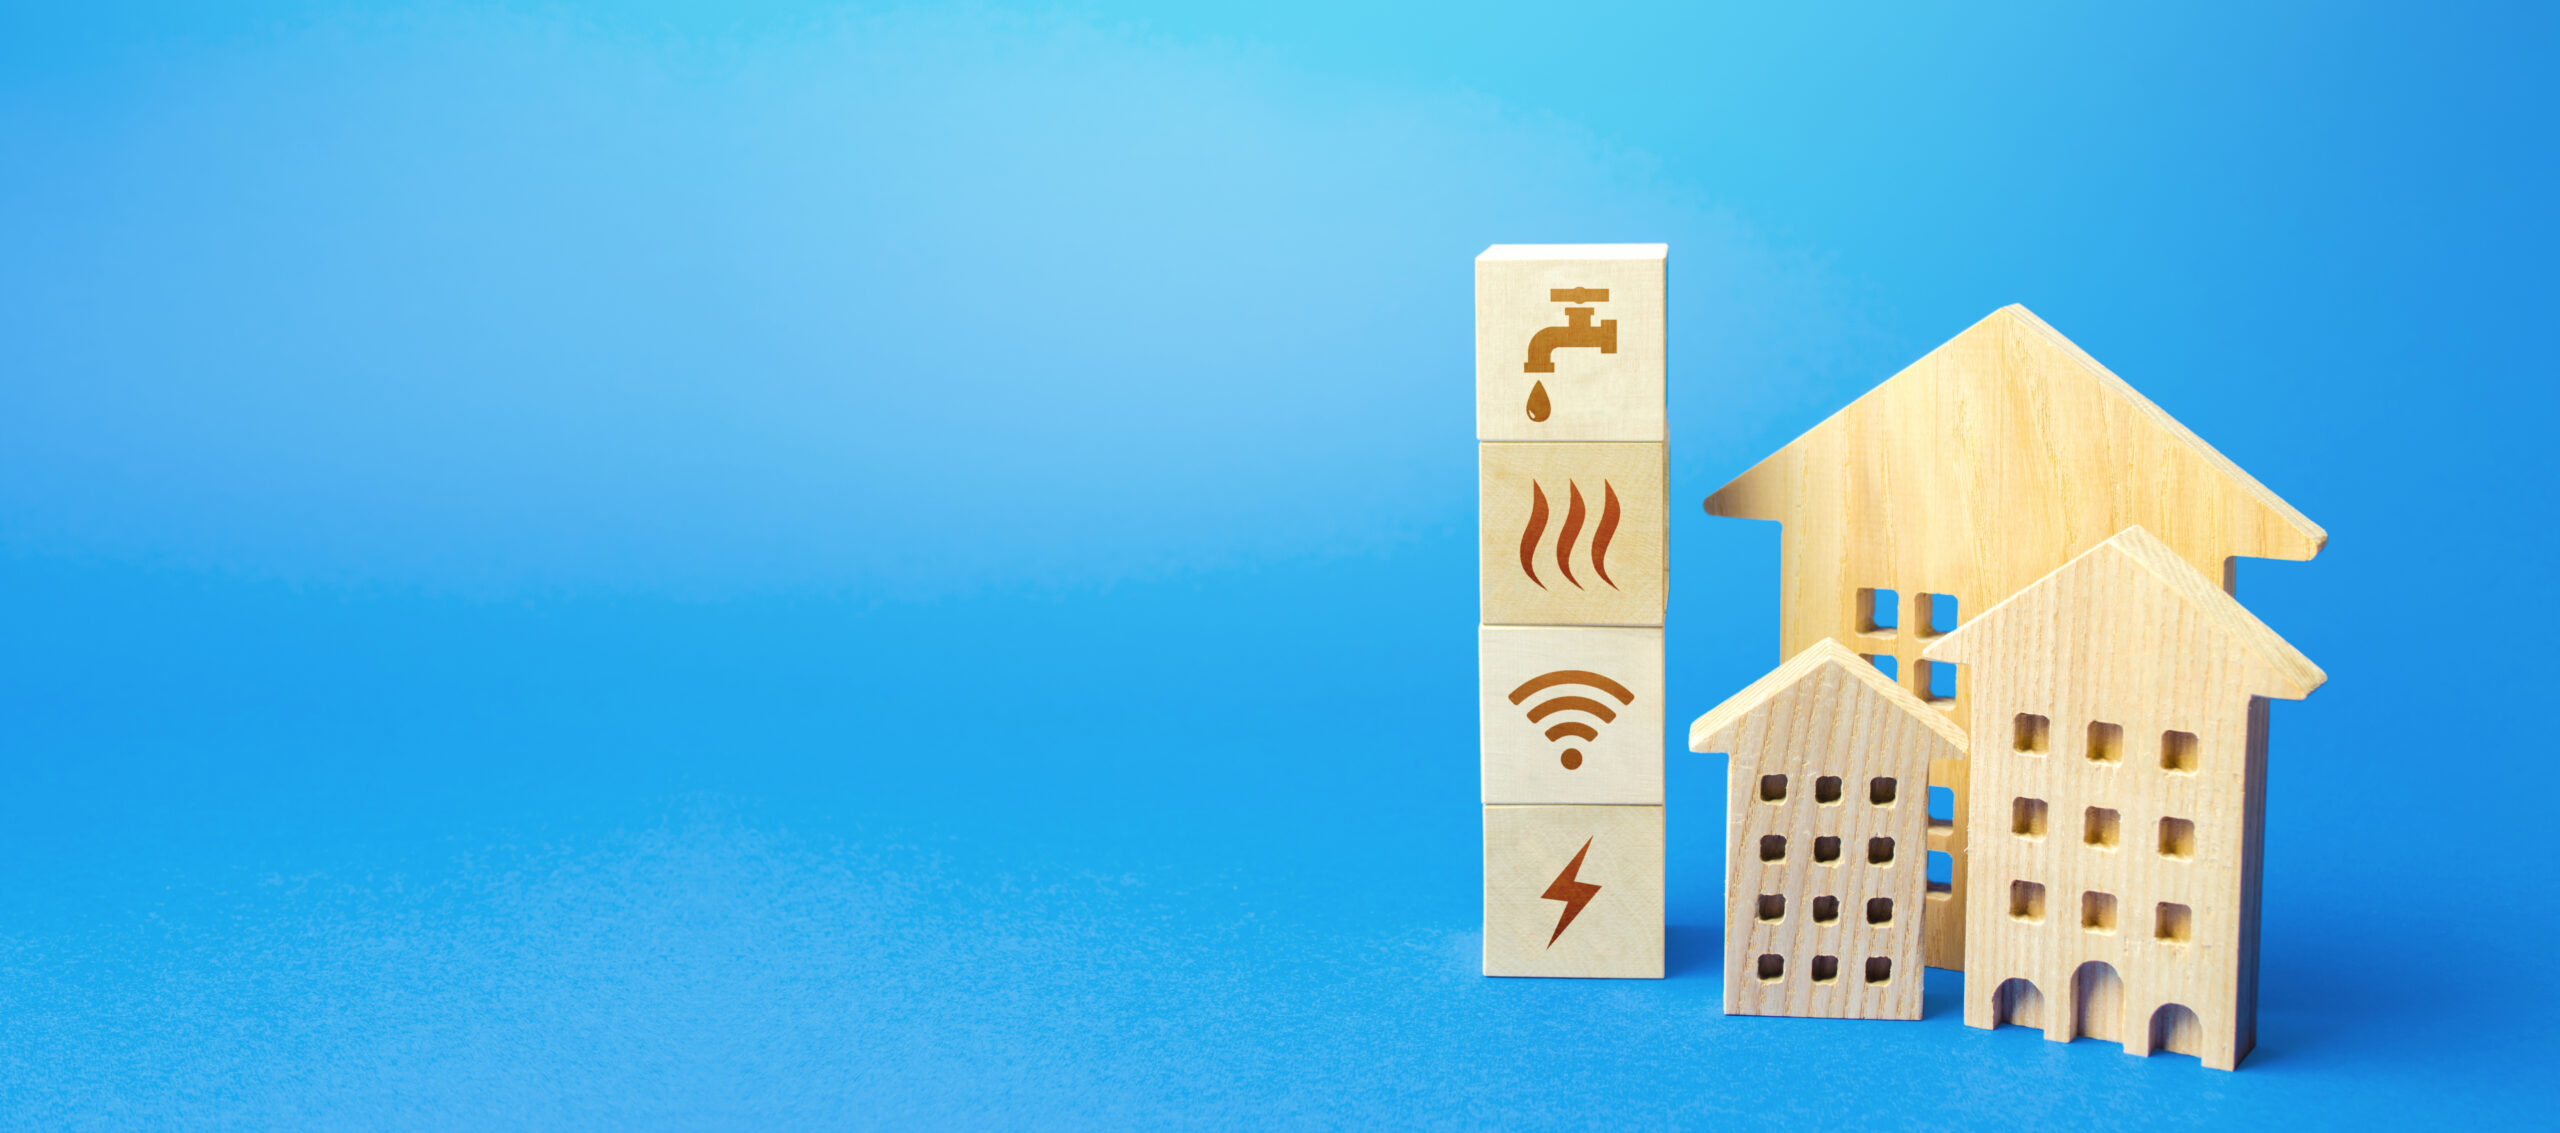 buildings and blocks with communal services symbols. Utilities public service. Price, payment methods, subsidies registration. Savings, reduced environmental impact. Energy saving